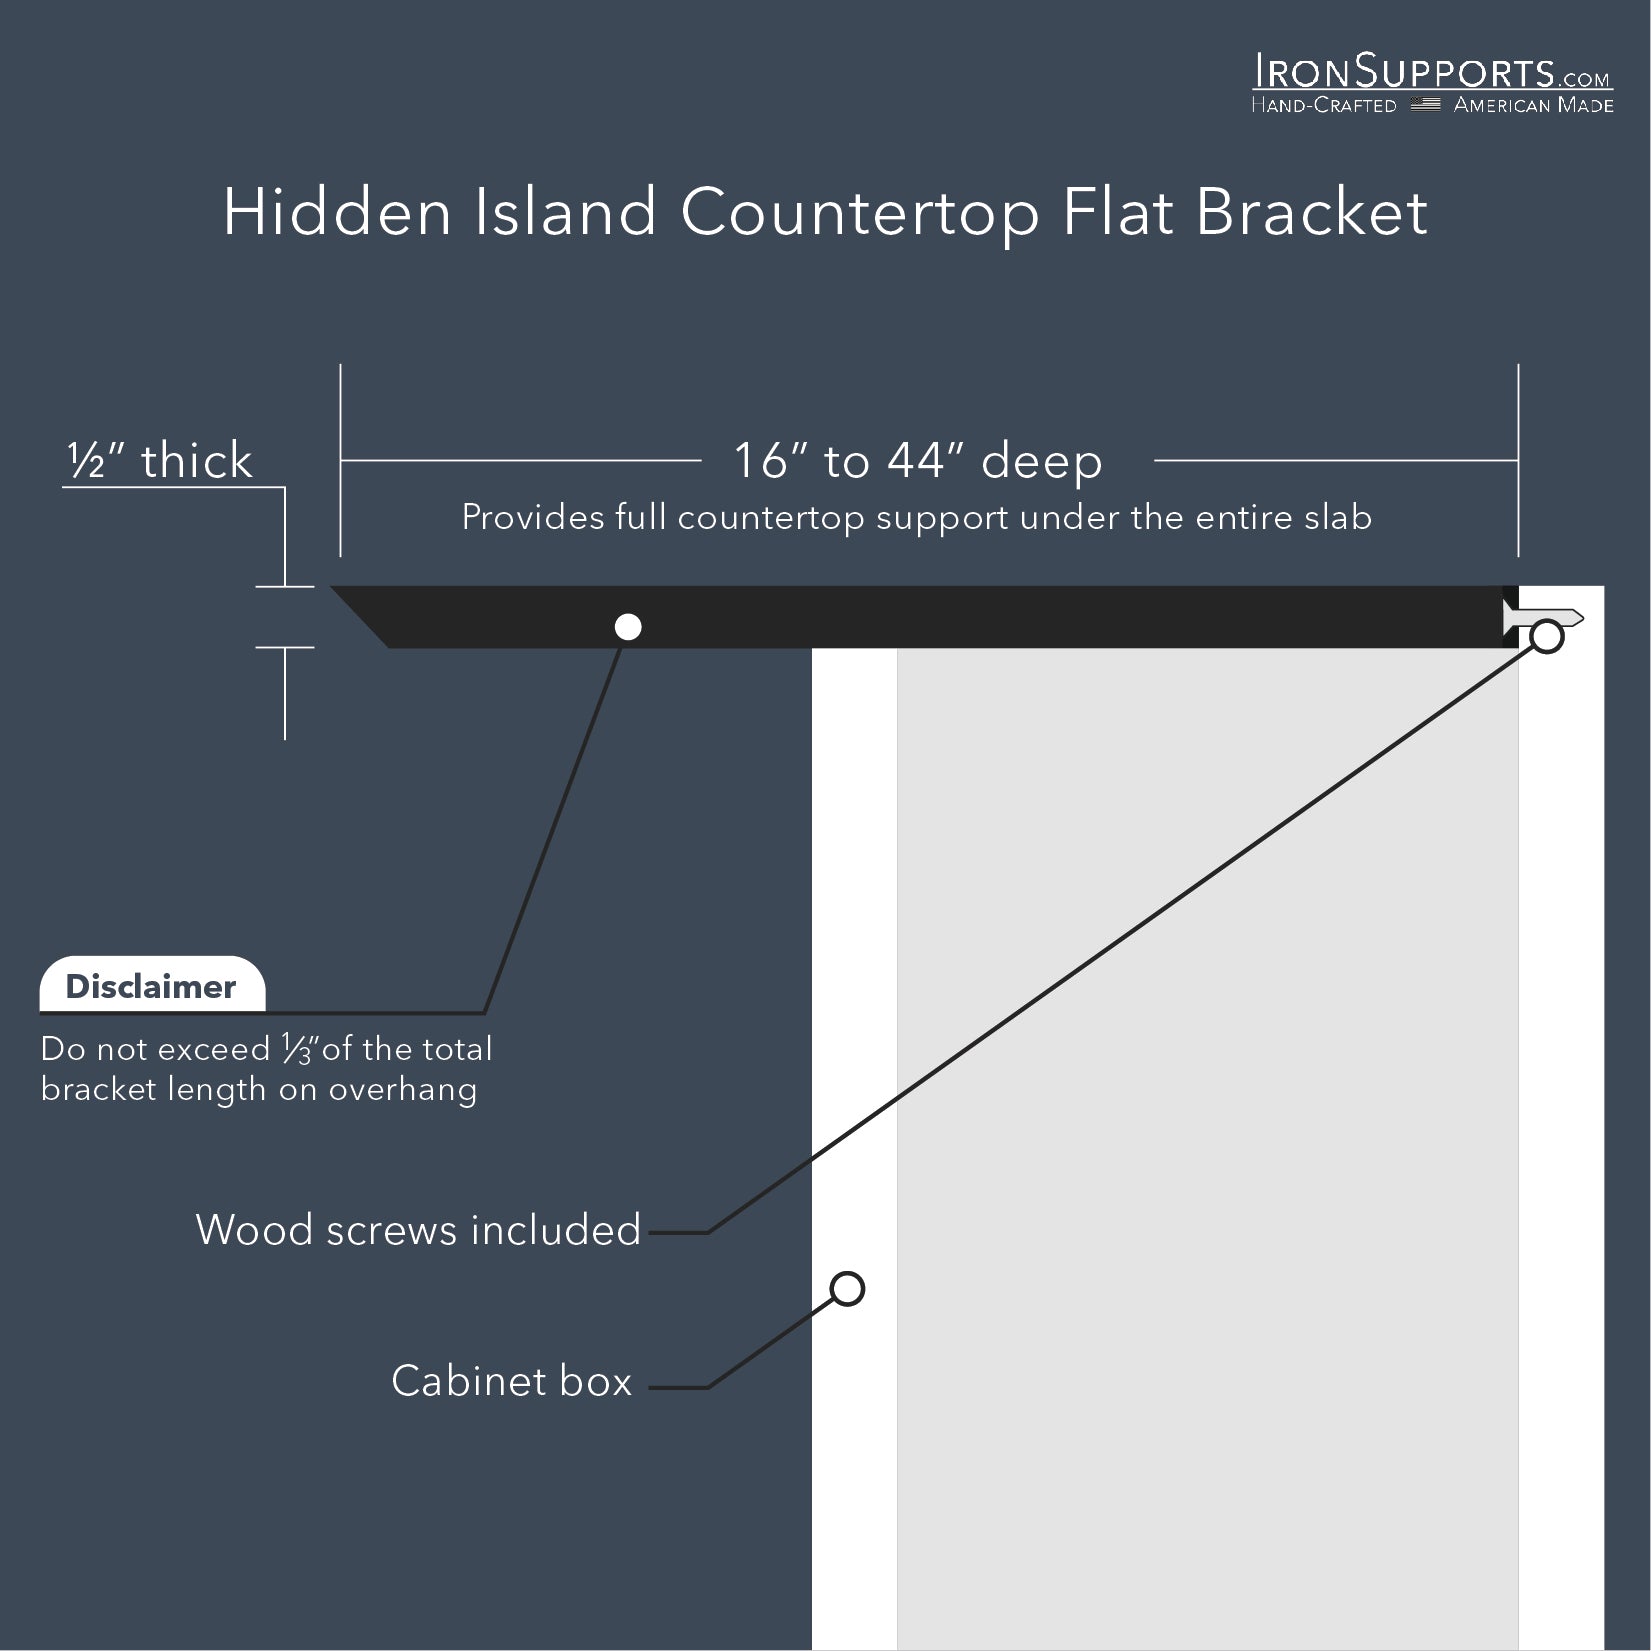 Hidden Island Countertop Bracket sizes (16" to 44") and 1/2" thickness detail. Supports large countertops evenly.